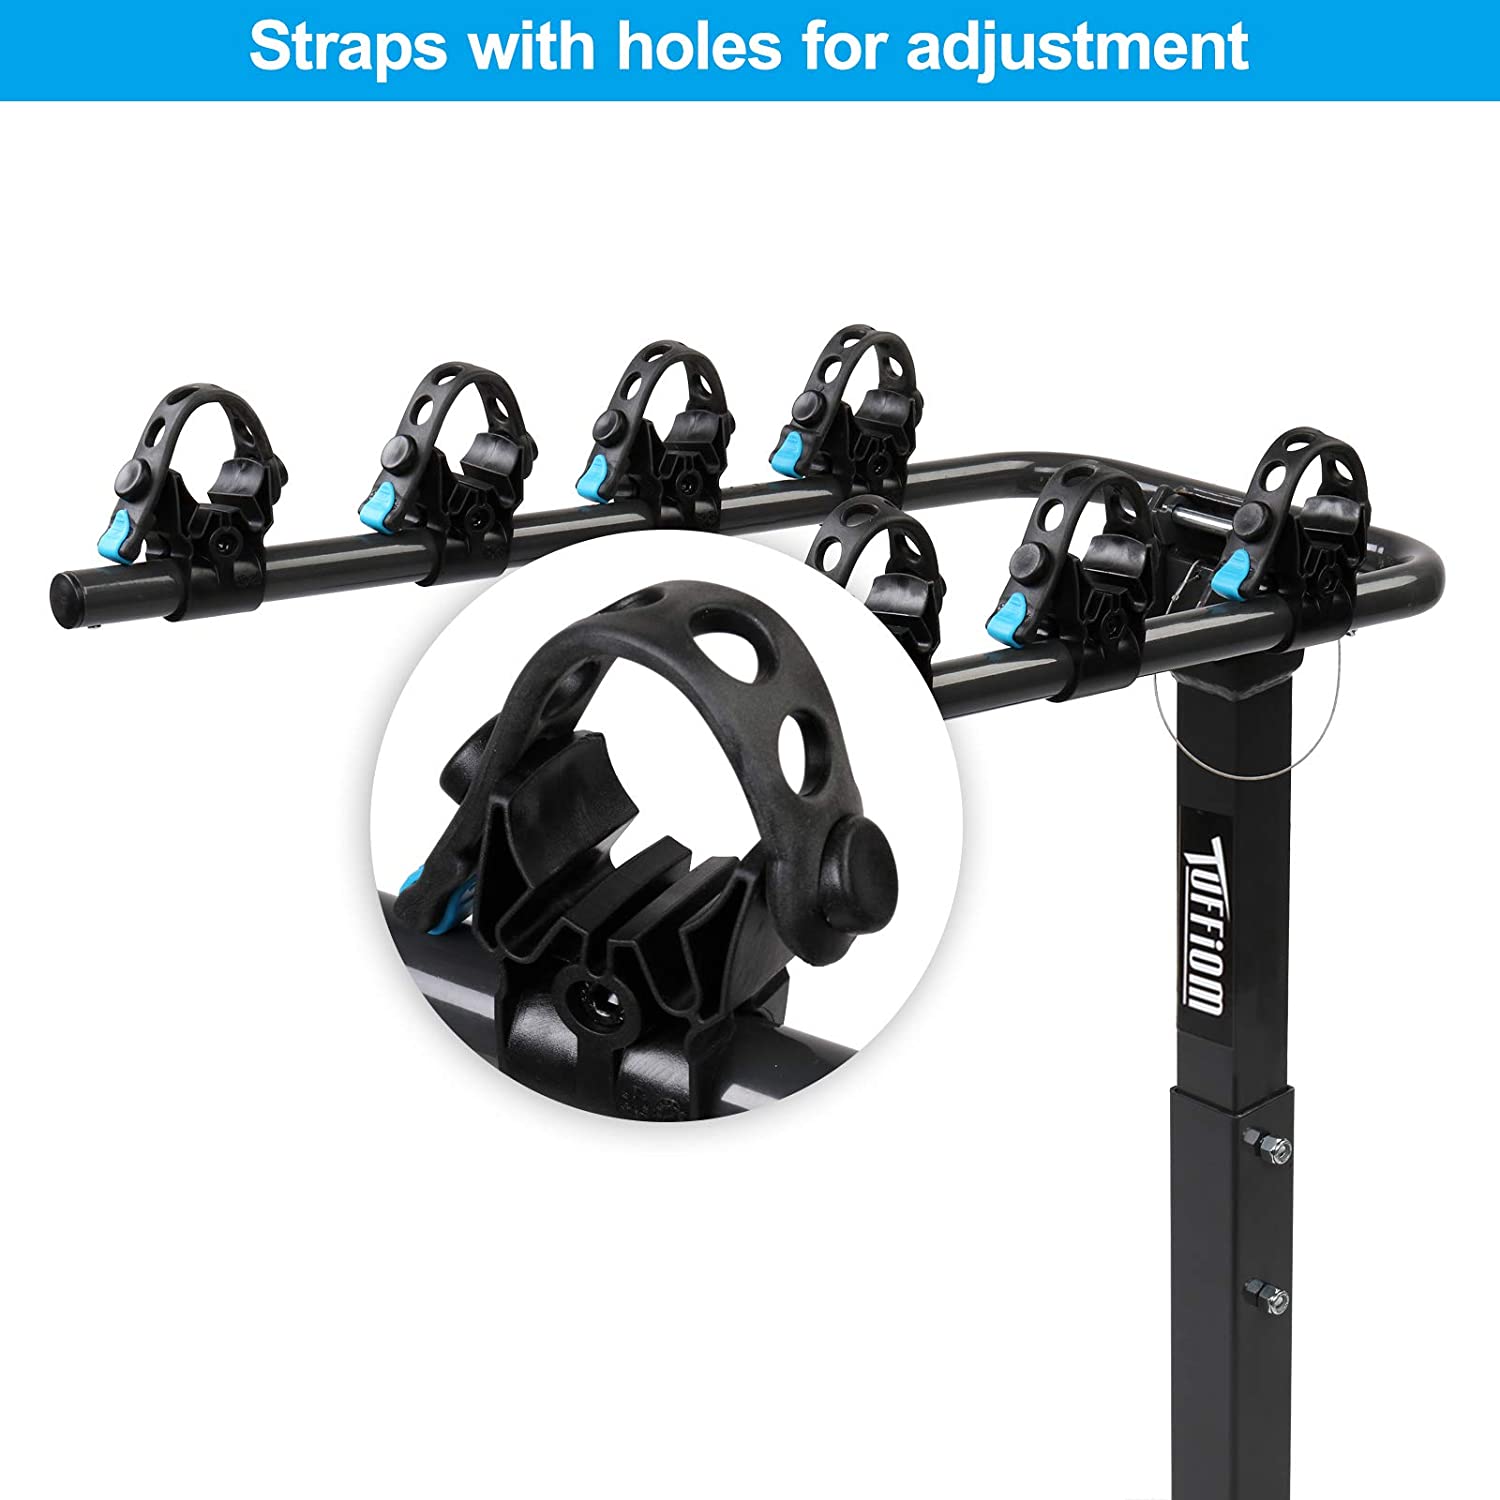 Adjustable Mounting Saddles & Rubber Straps TUFFIOM 3-Bike Hitch Mount Rack with Stabilizer Black Bicycle Carrier Holder for Car Truck SUV Minivan with 2Inch Hitch Receiver